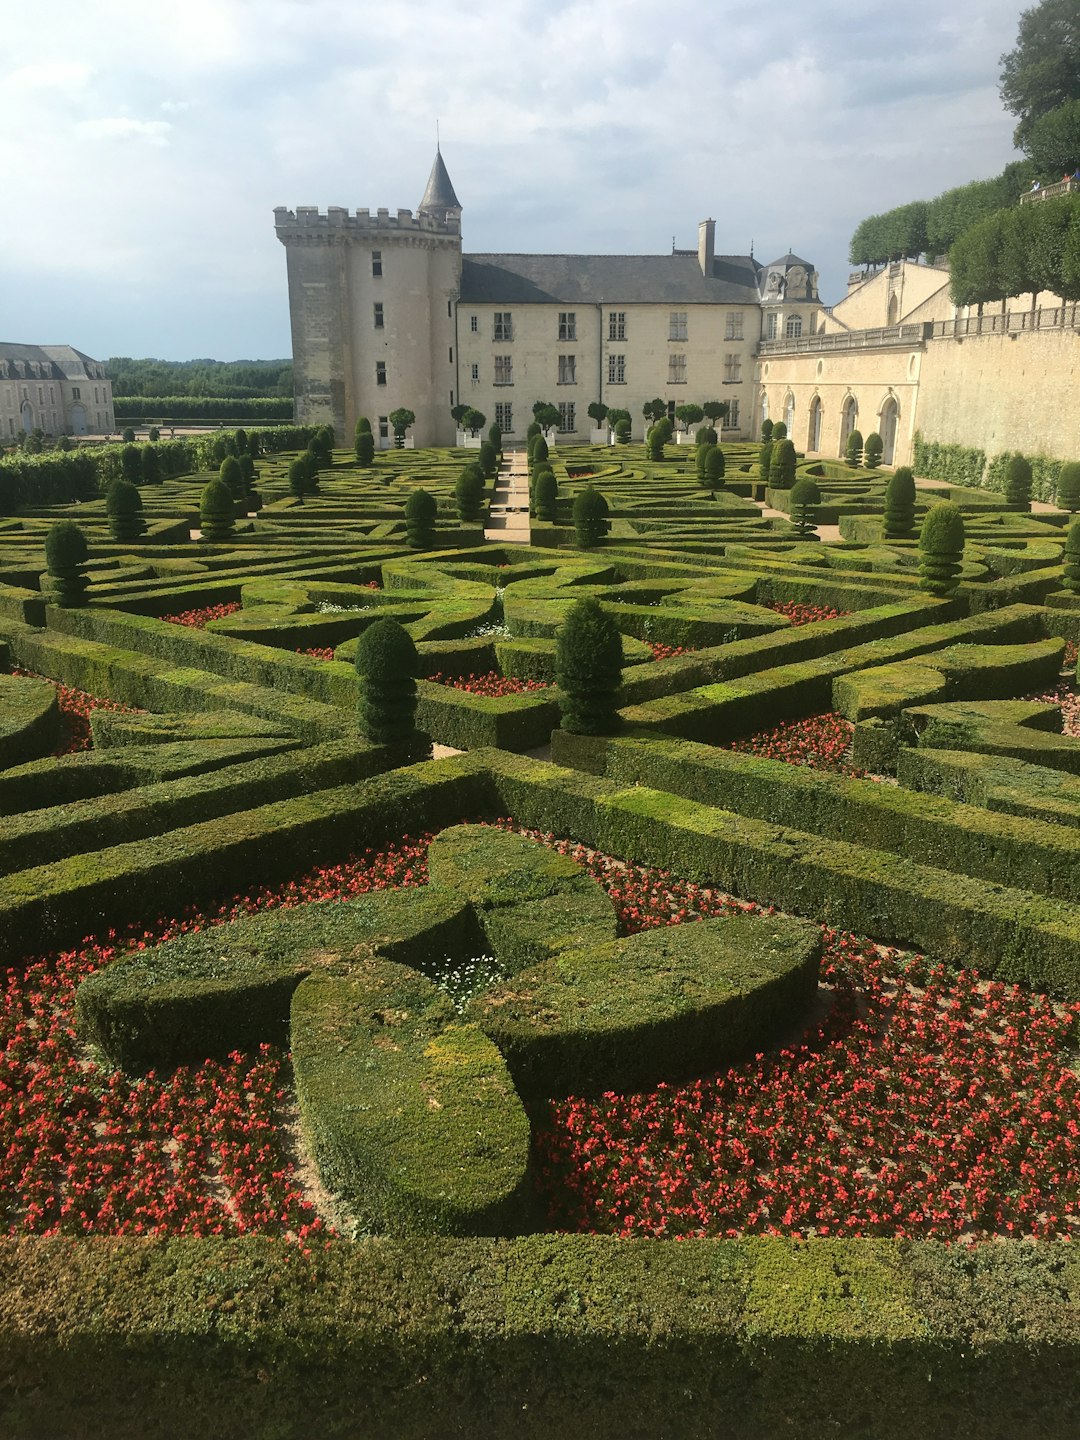 Travel Tips and Stories of Château de Villandry in France